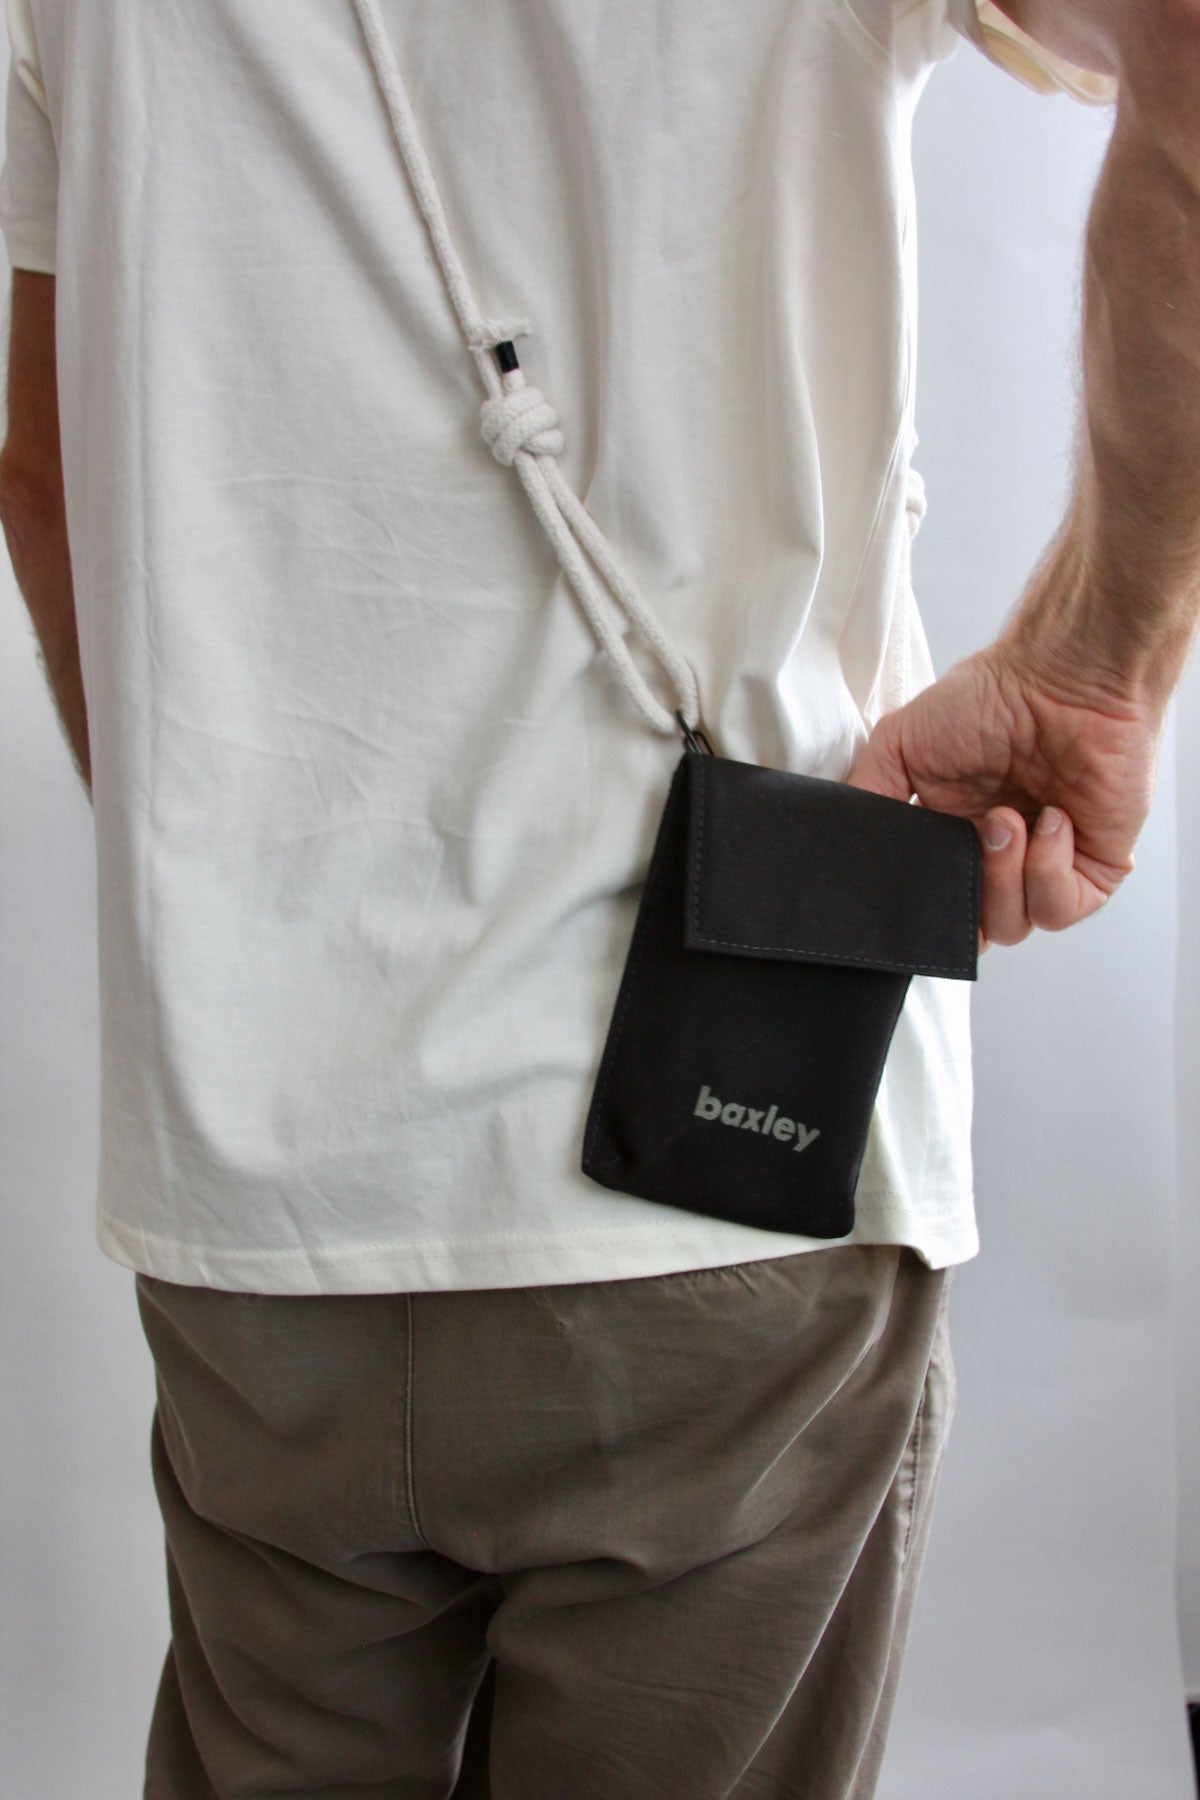 A male model is shown wearing Pip the pocket. The bag is black with a screenprinted logo and white rope strap.